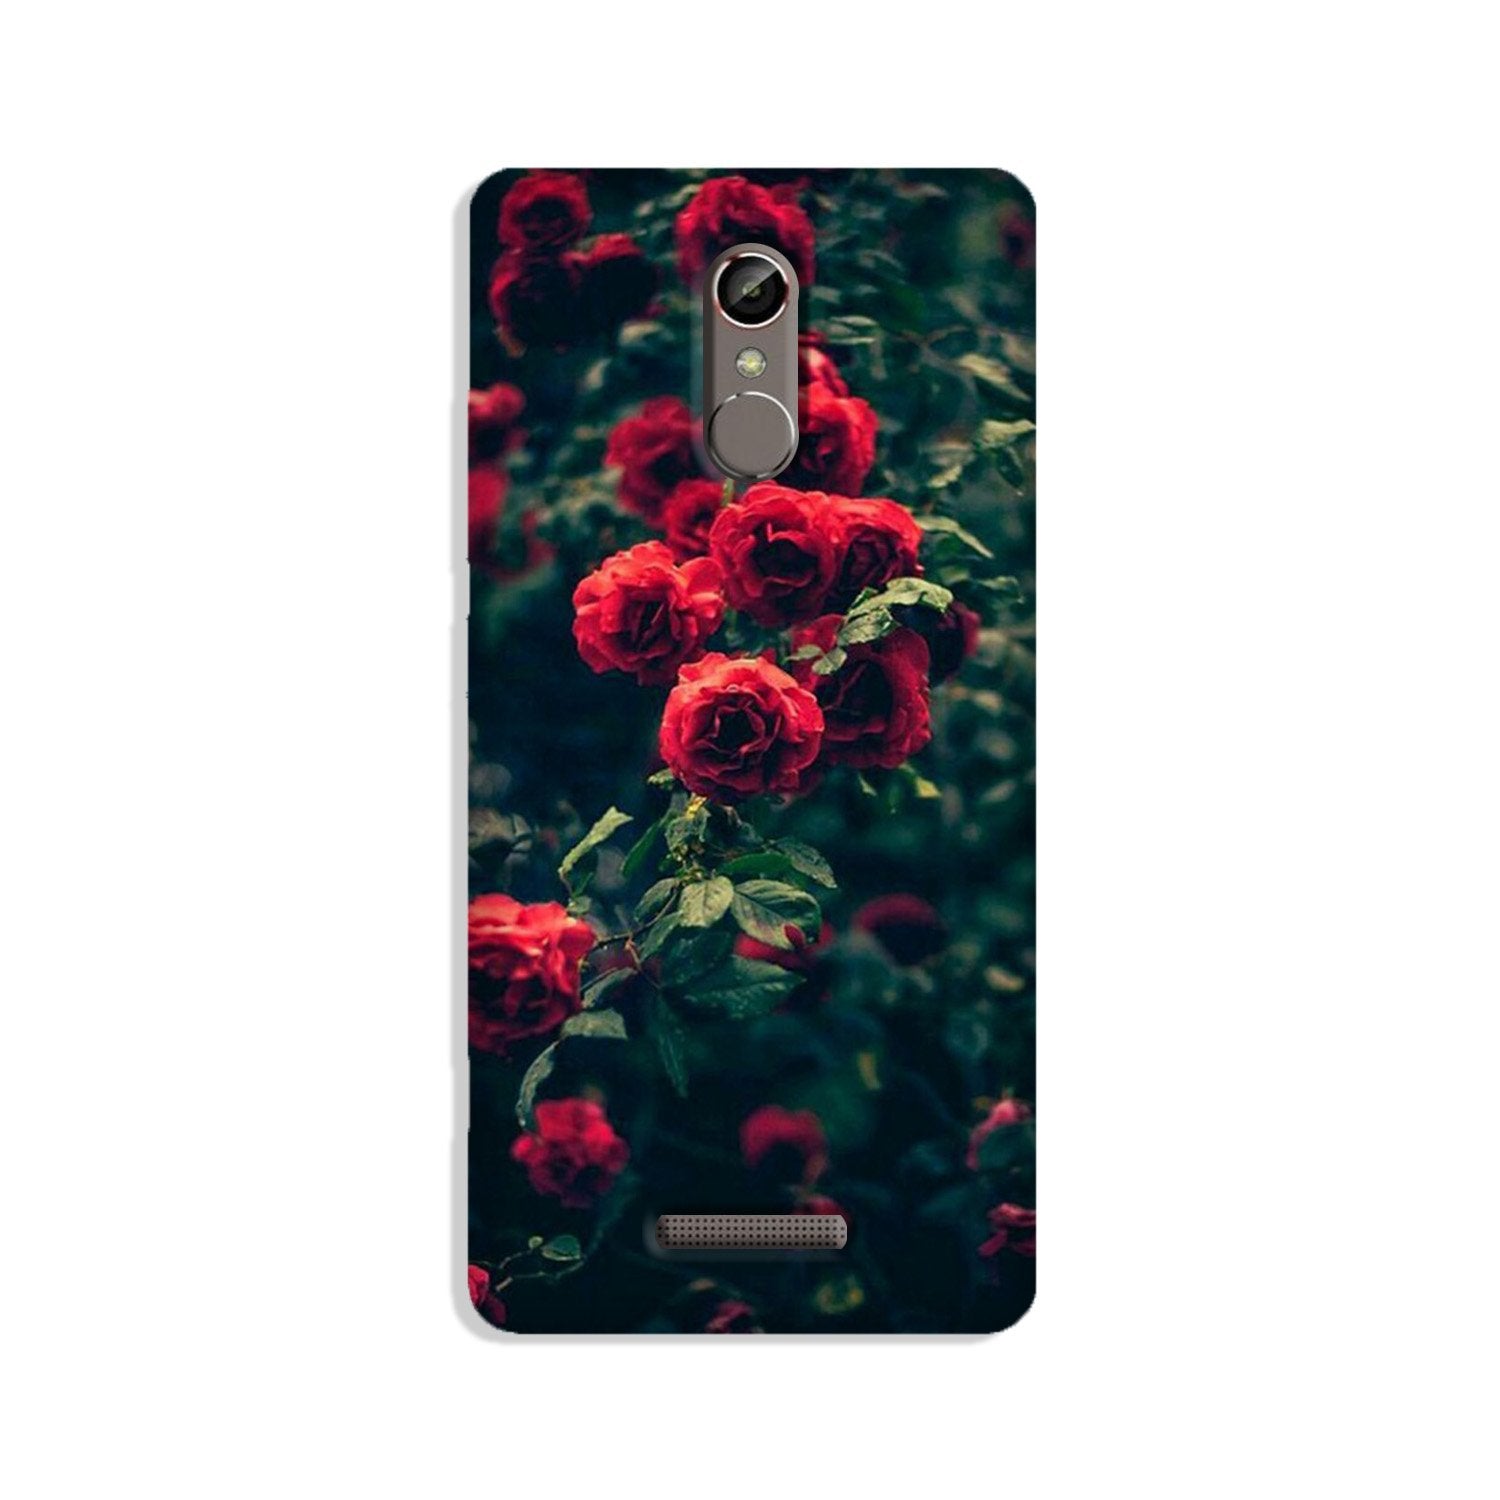 Red Rose Case for Gionee S6s